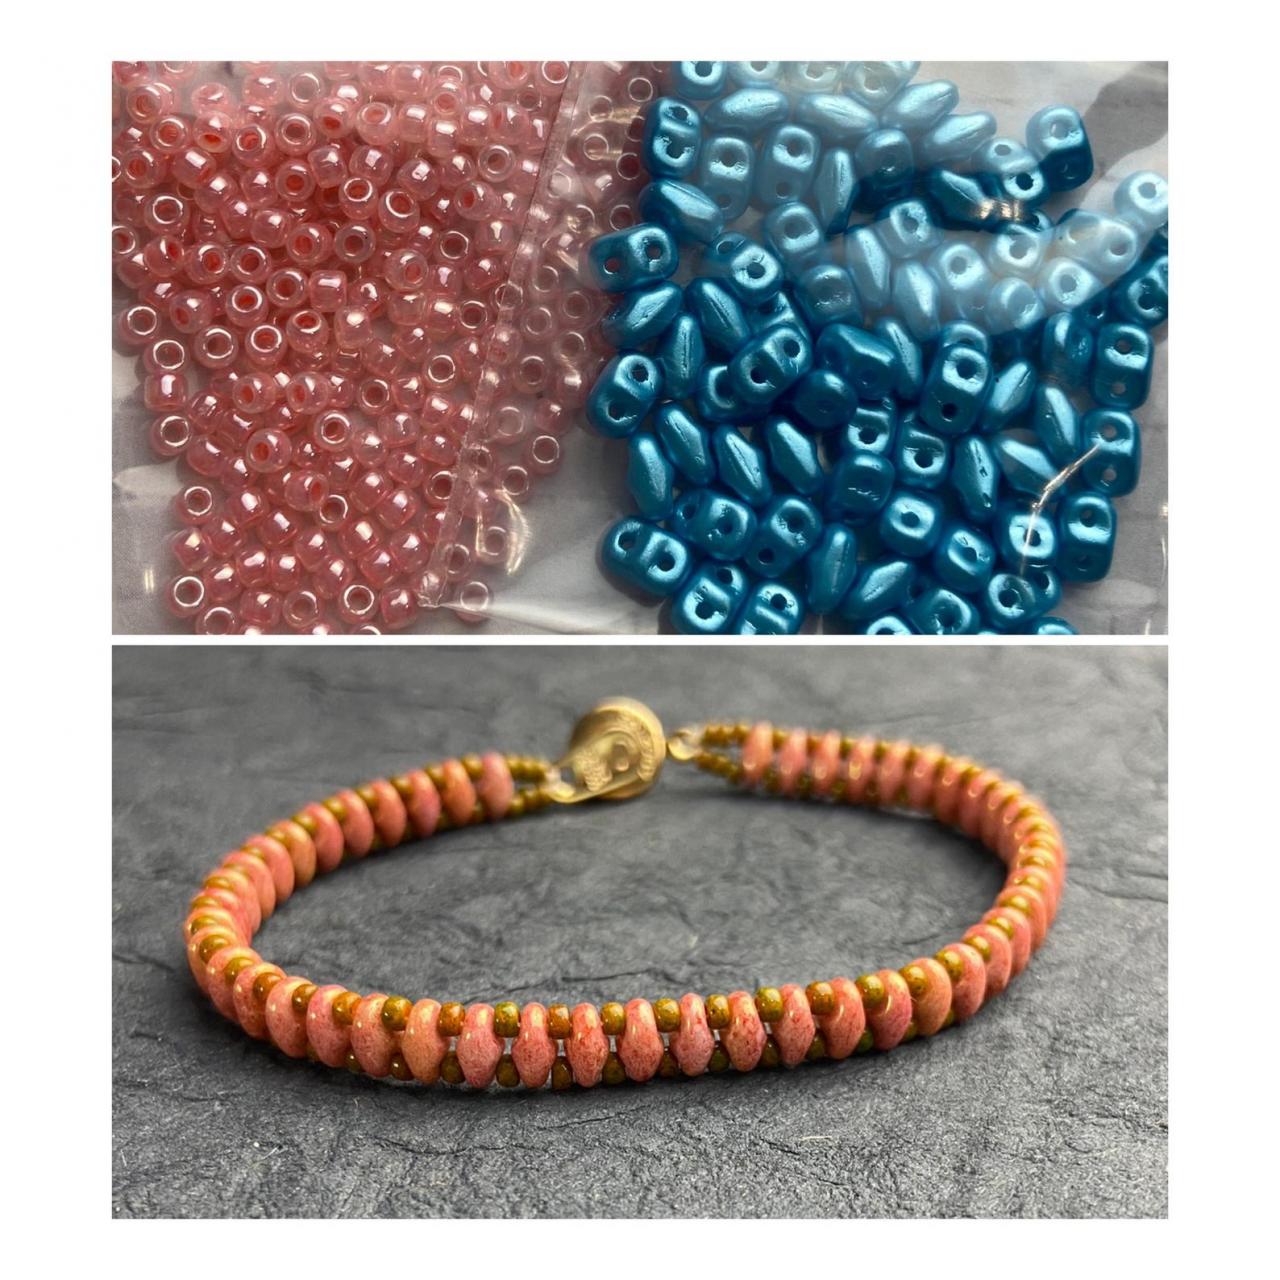 Kit Coral Pink Turquoise Blue Simple Superduo Bracelet Easy No Tools Needed Mix Diy Beginner Fun